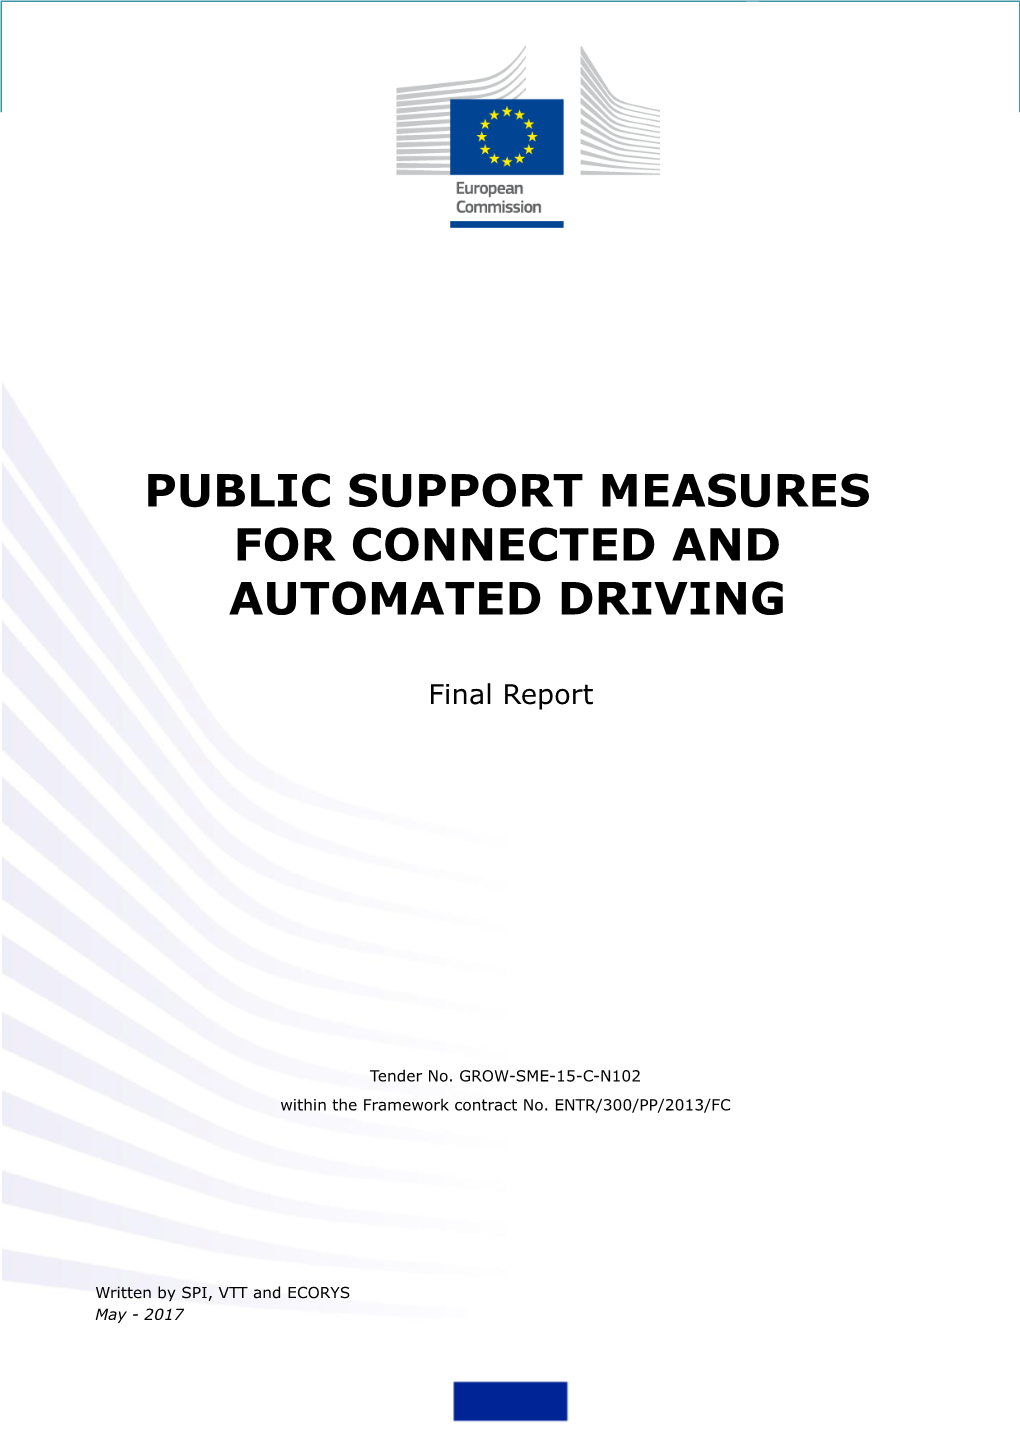 Public Support Measures for Connected and Automated Driving